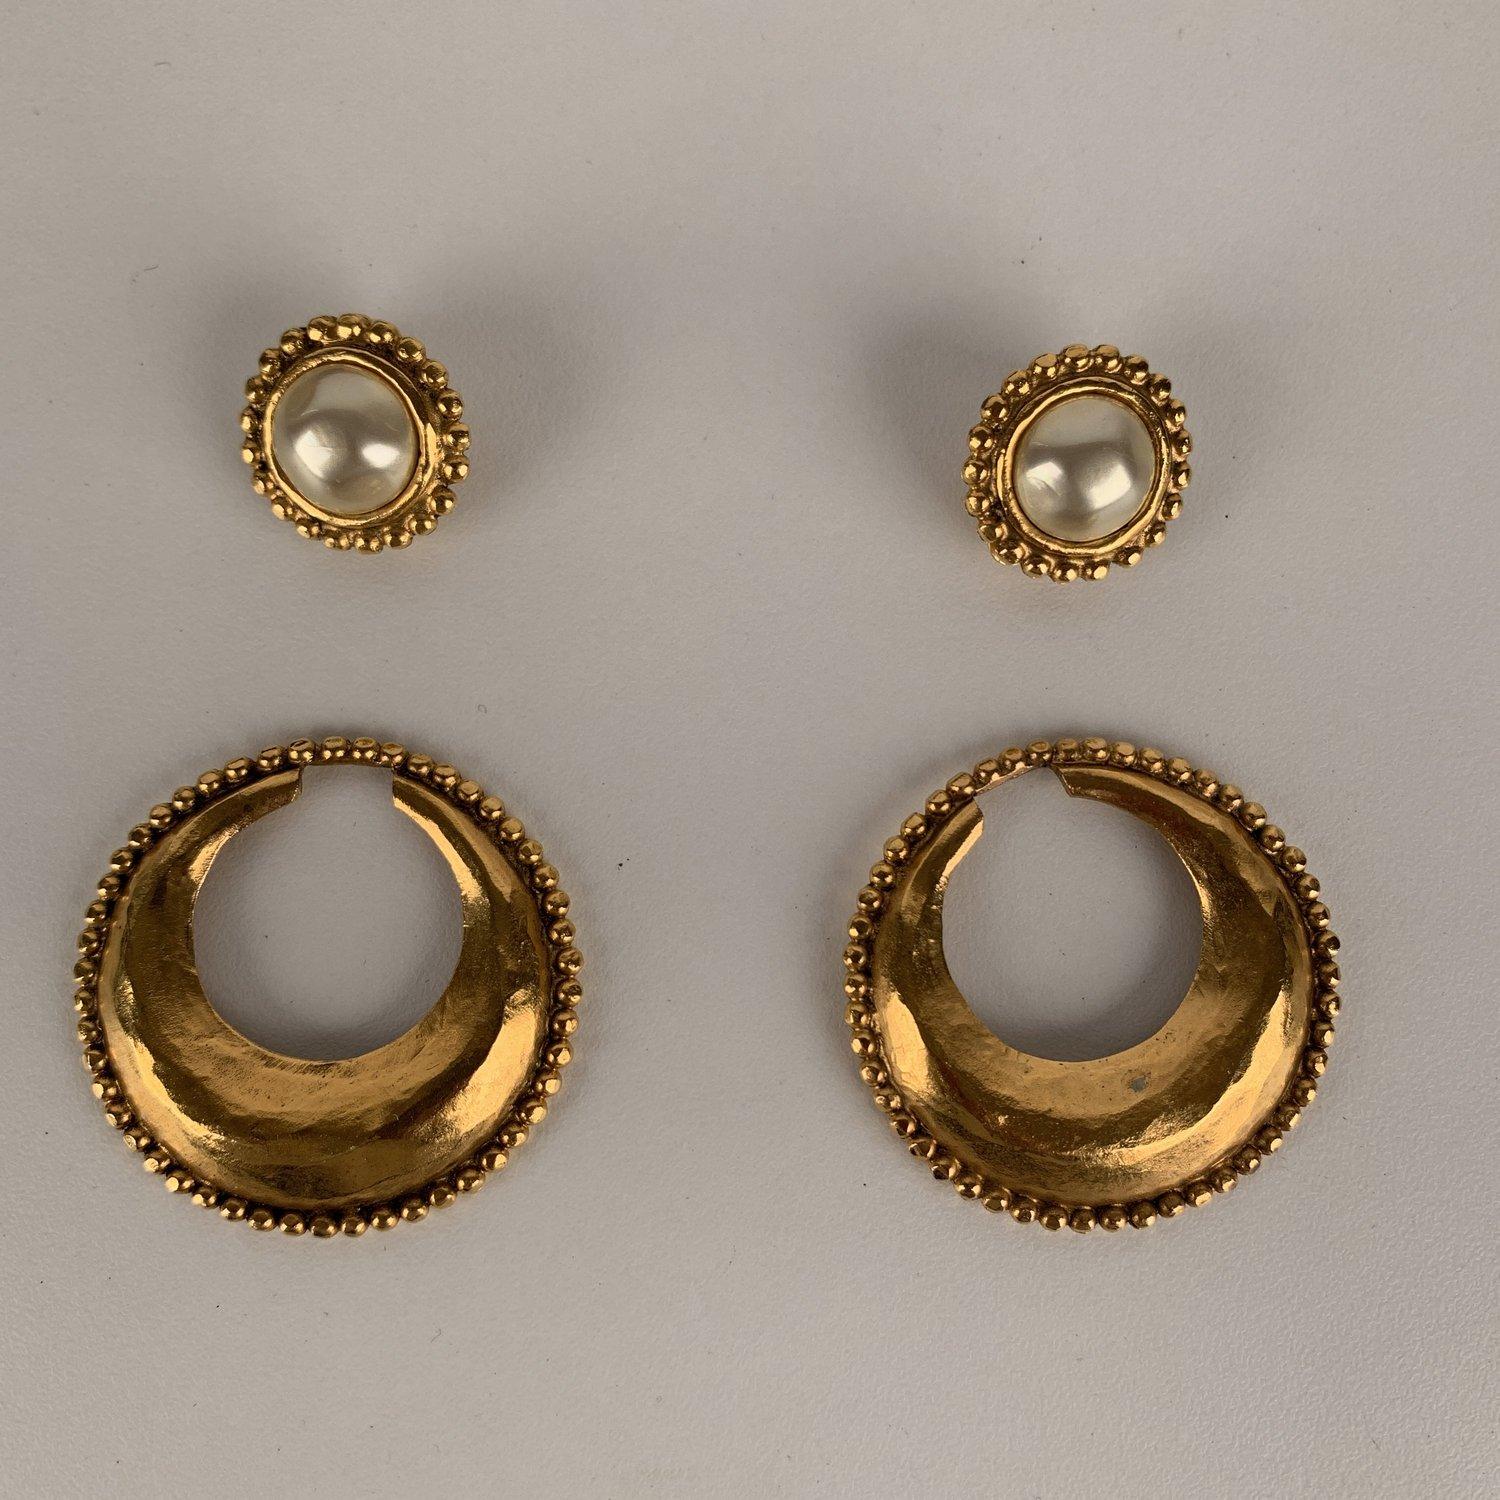 MATERIAL: Metal COLOR: Gold MODEL: Two Way Clip on Earrings GENDER: Women SIZE: Diameter (only Studs): 0.75 inches - 1,9 cm - Height (Studs + loops): 2.5 inches -5,1 cm - Width (only loops): 1.75 inches - 4,4 cm Condition E - EXCELLENT Used once or